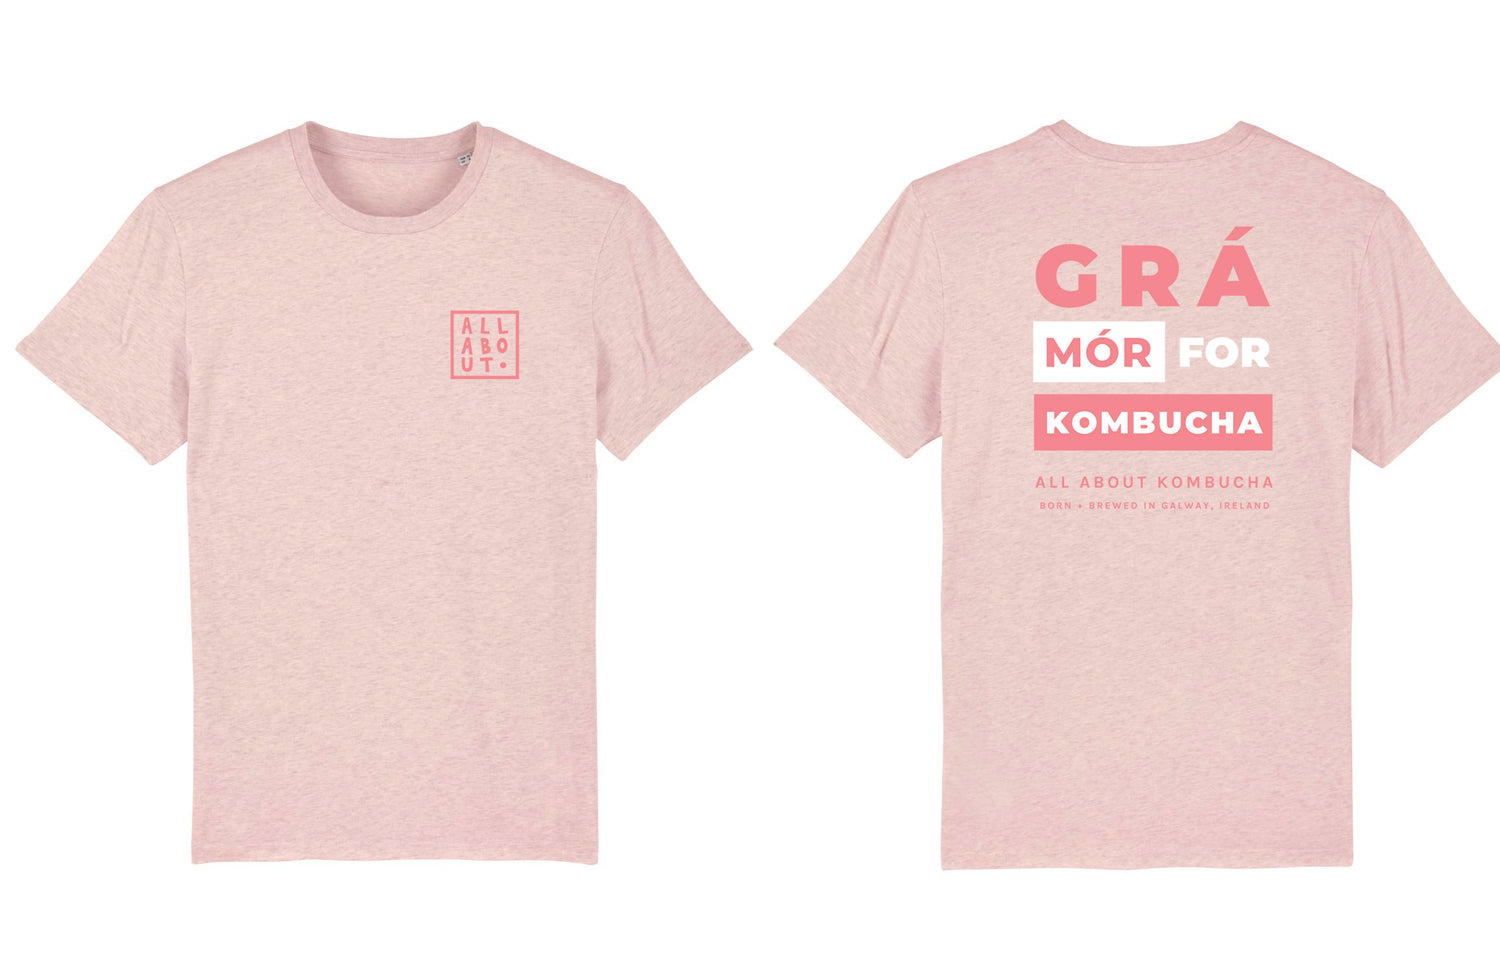 Front and back designs of All About Kombucha's branded light pink t-shirt side by side with logo on front chest and the text 'Grá Mór for Kombucha' on the back